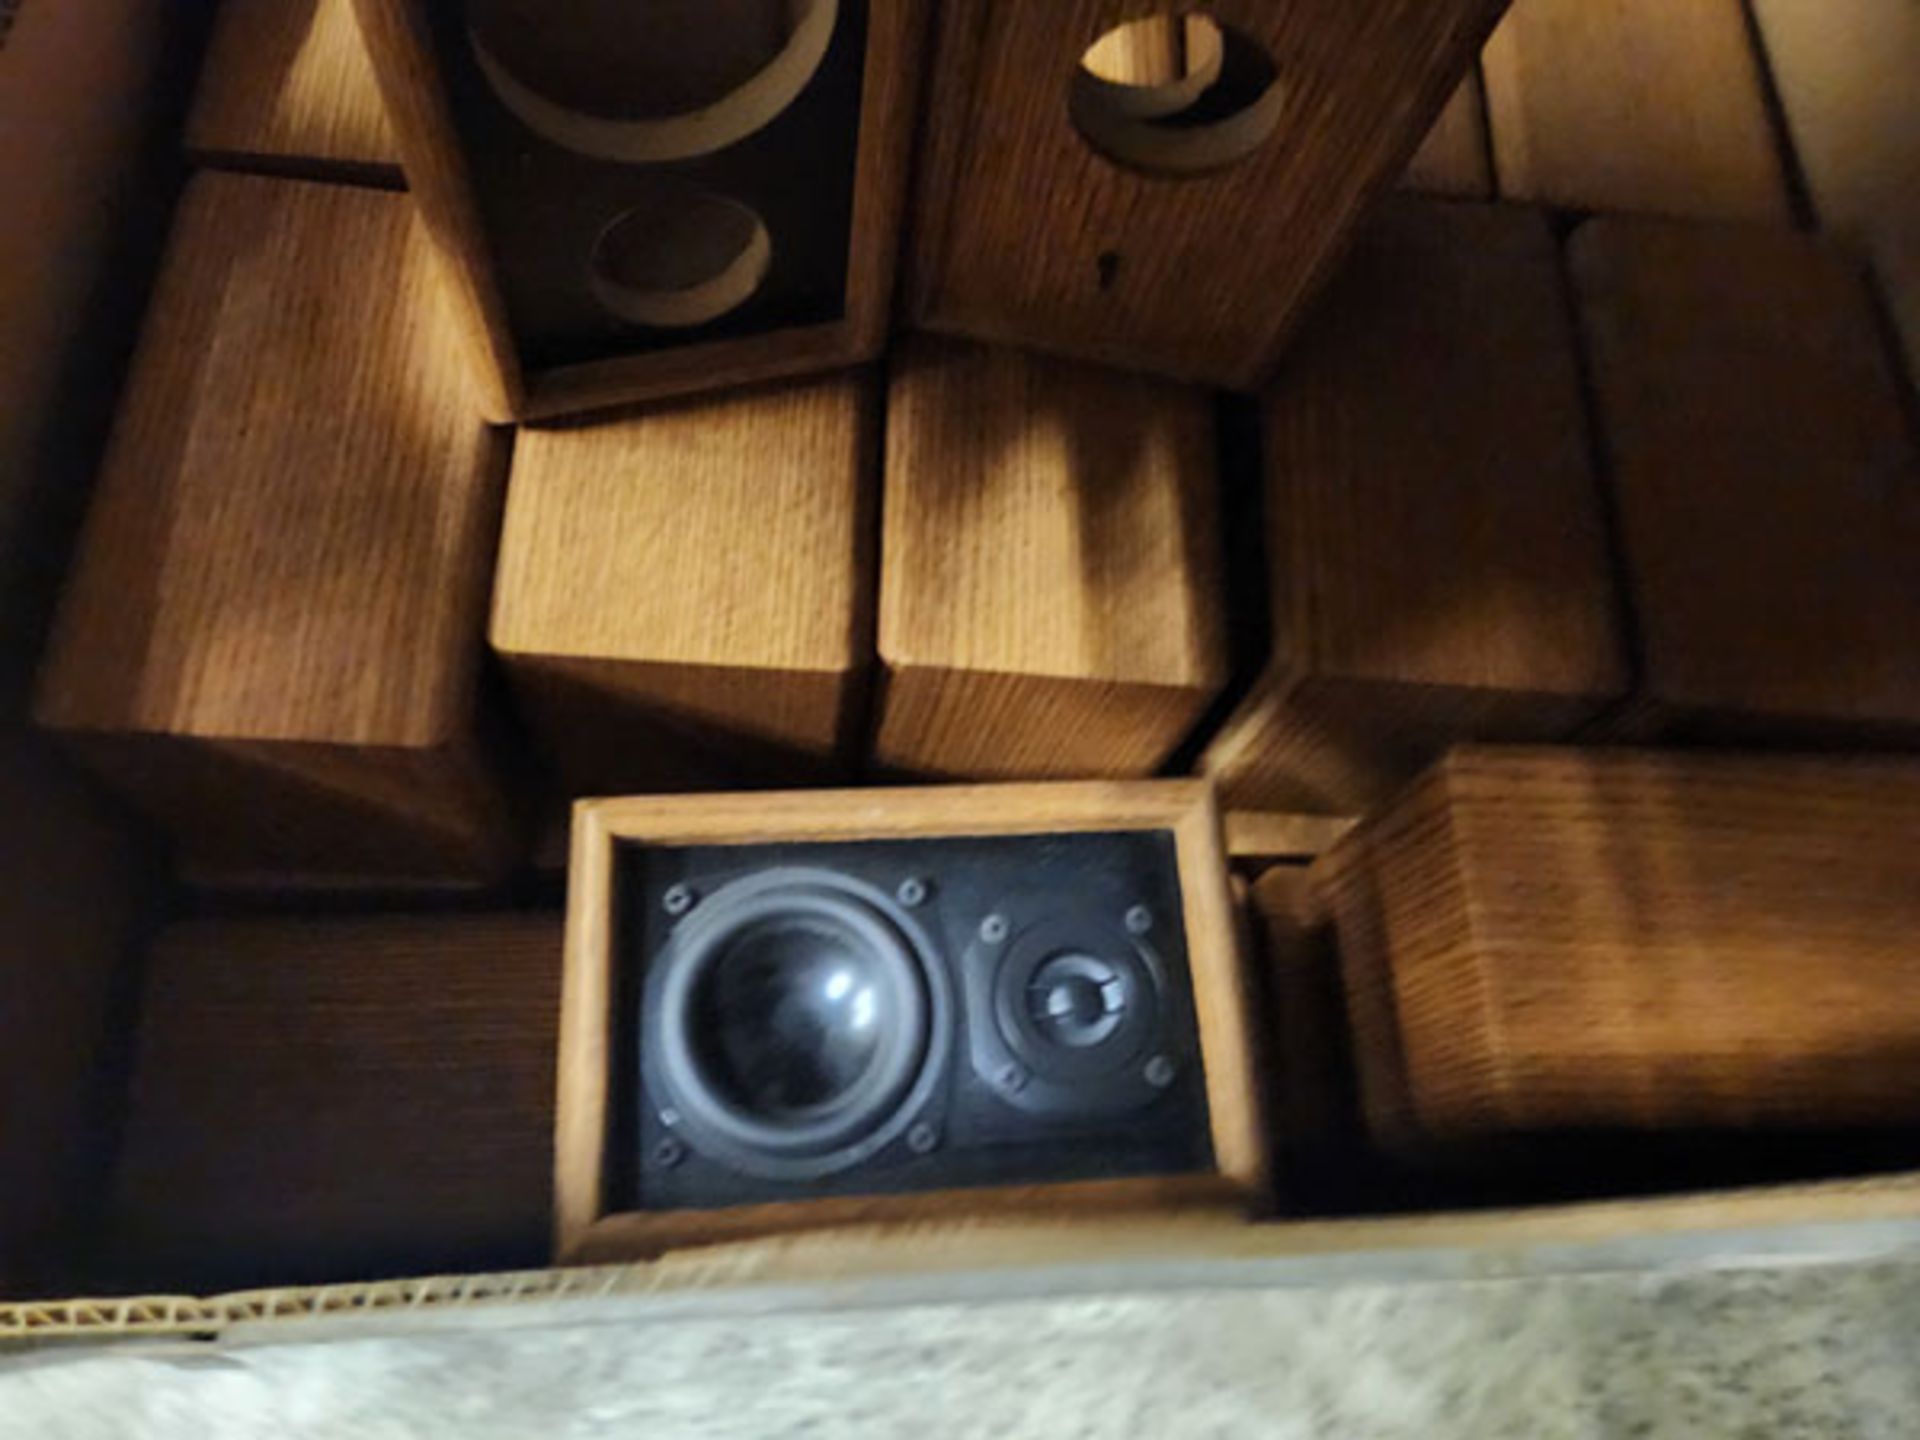 6 BOXES OF WOOD SPEAKER BOXES APPROX 5" X 4-1/2" X 7-1/2" - Image 3 of 7